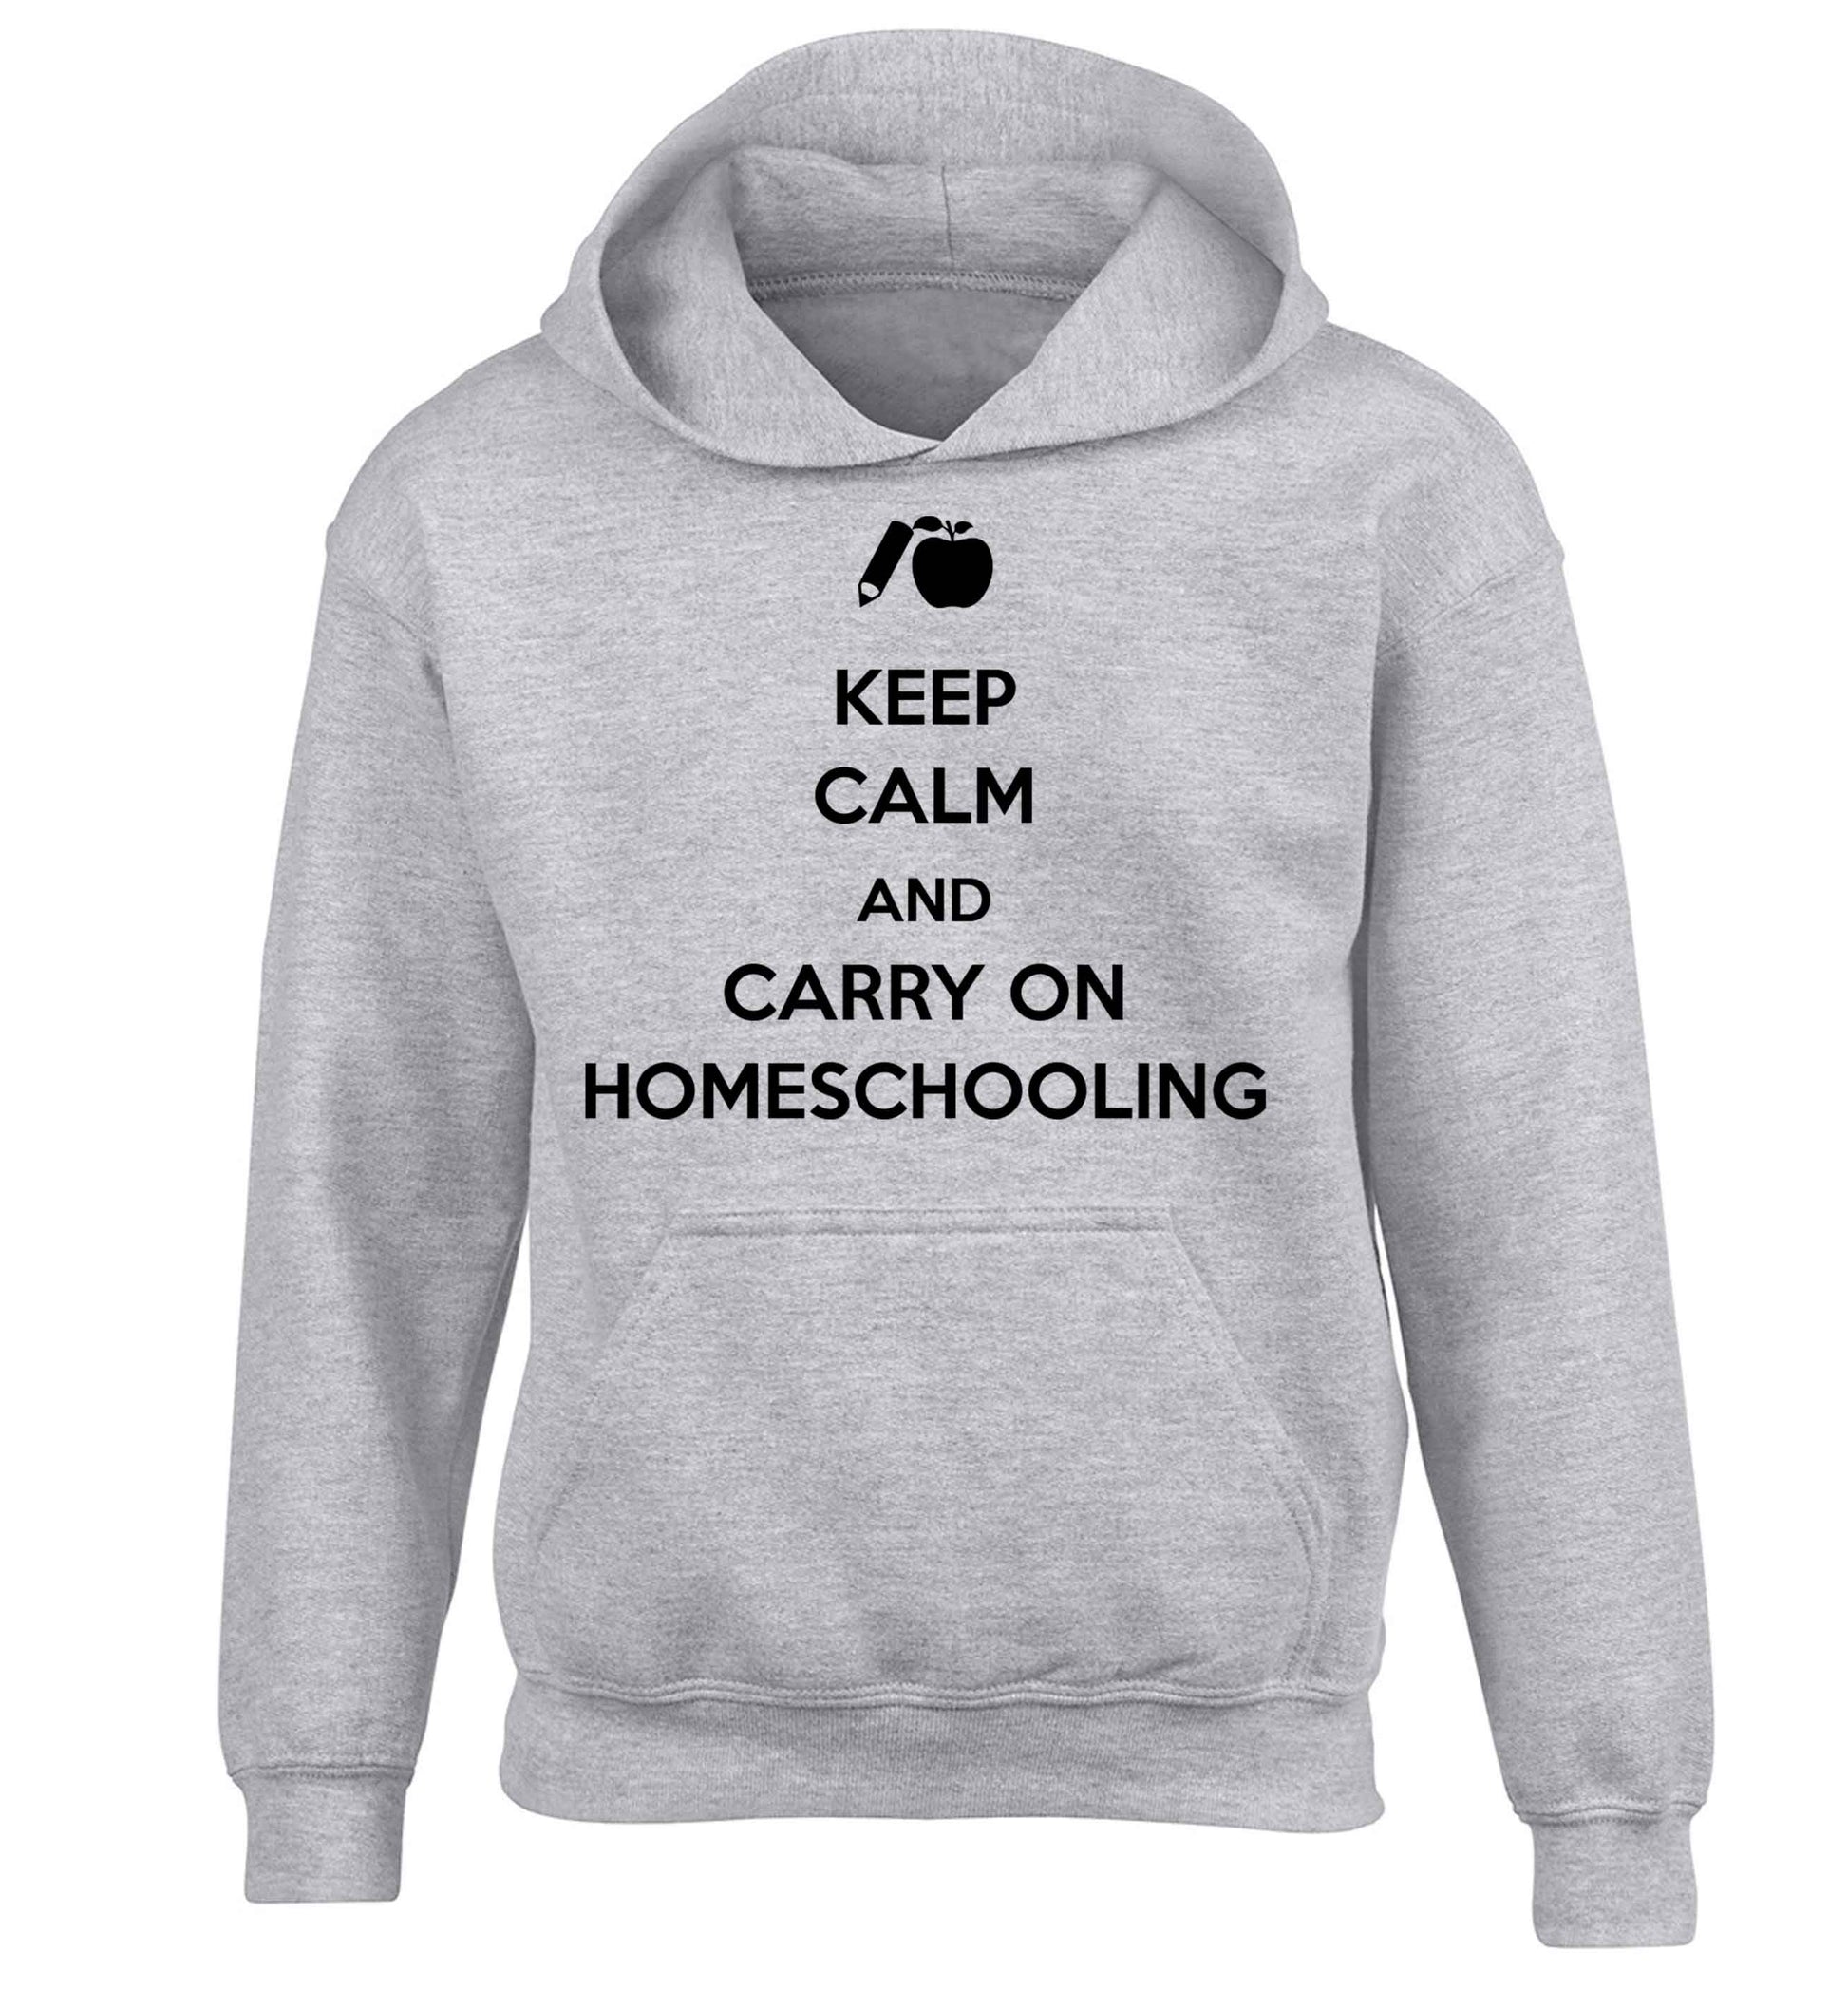 Keep calm and carry on homeschooling children's grey hoodie 12-13 Years